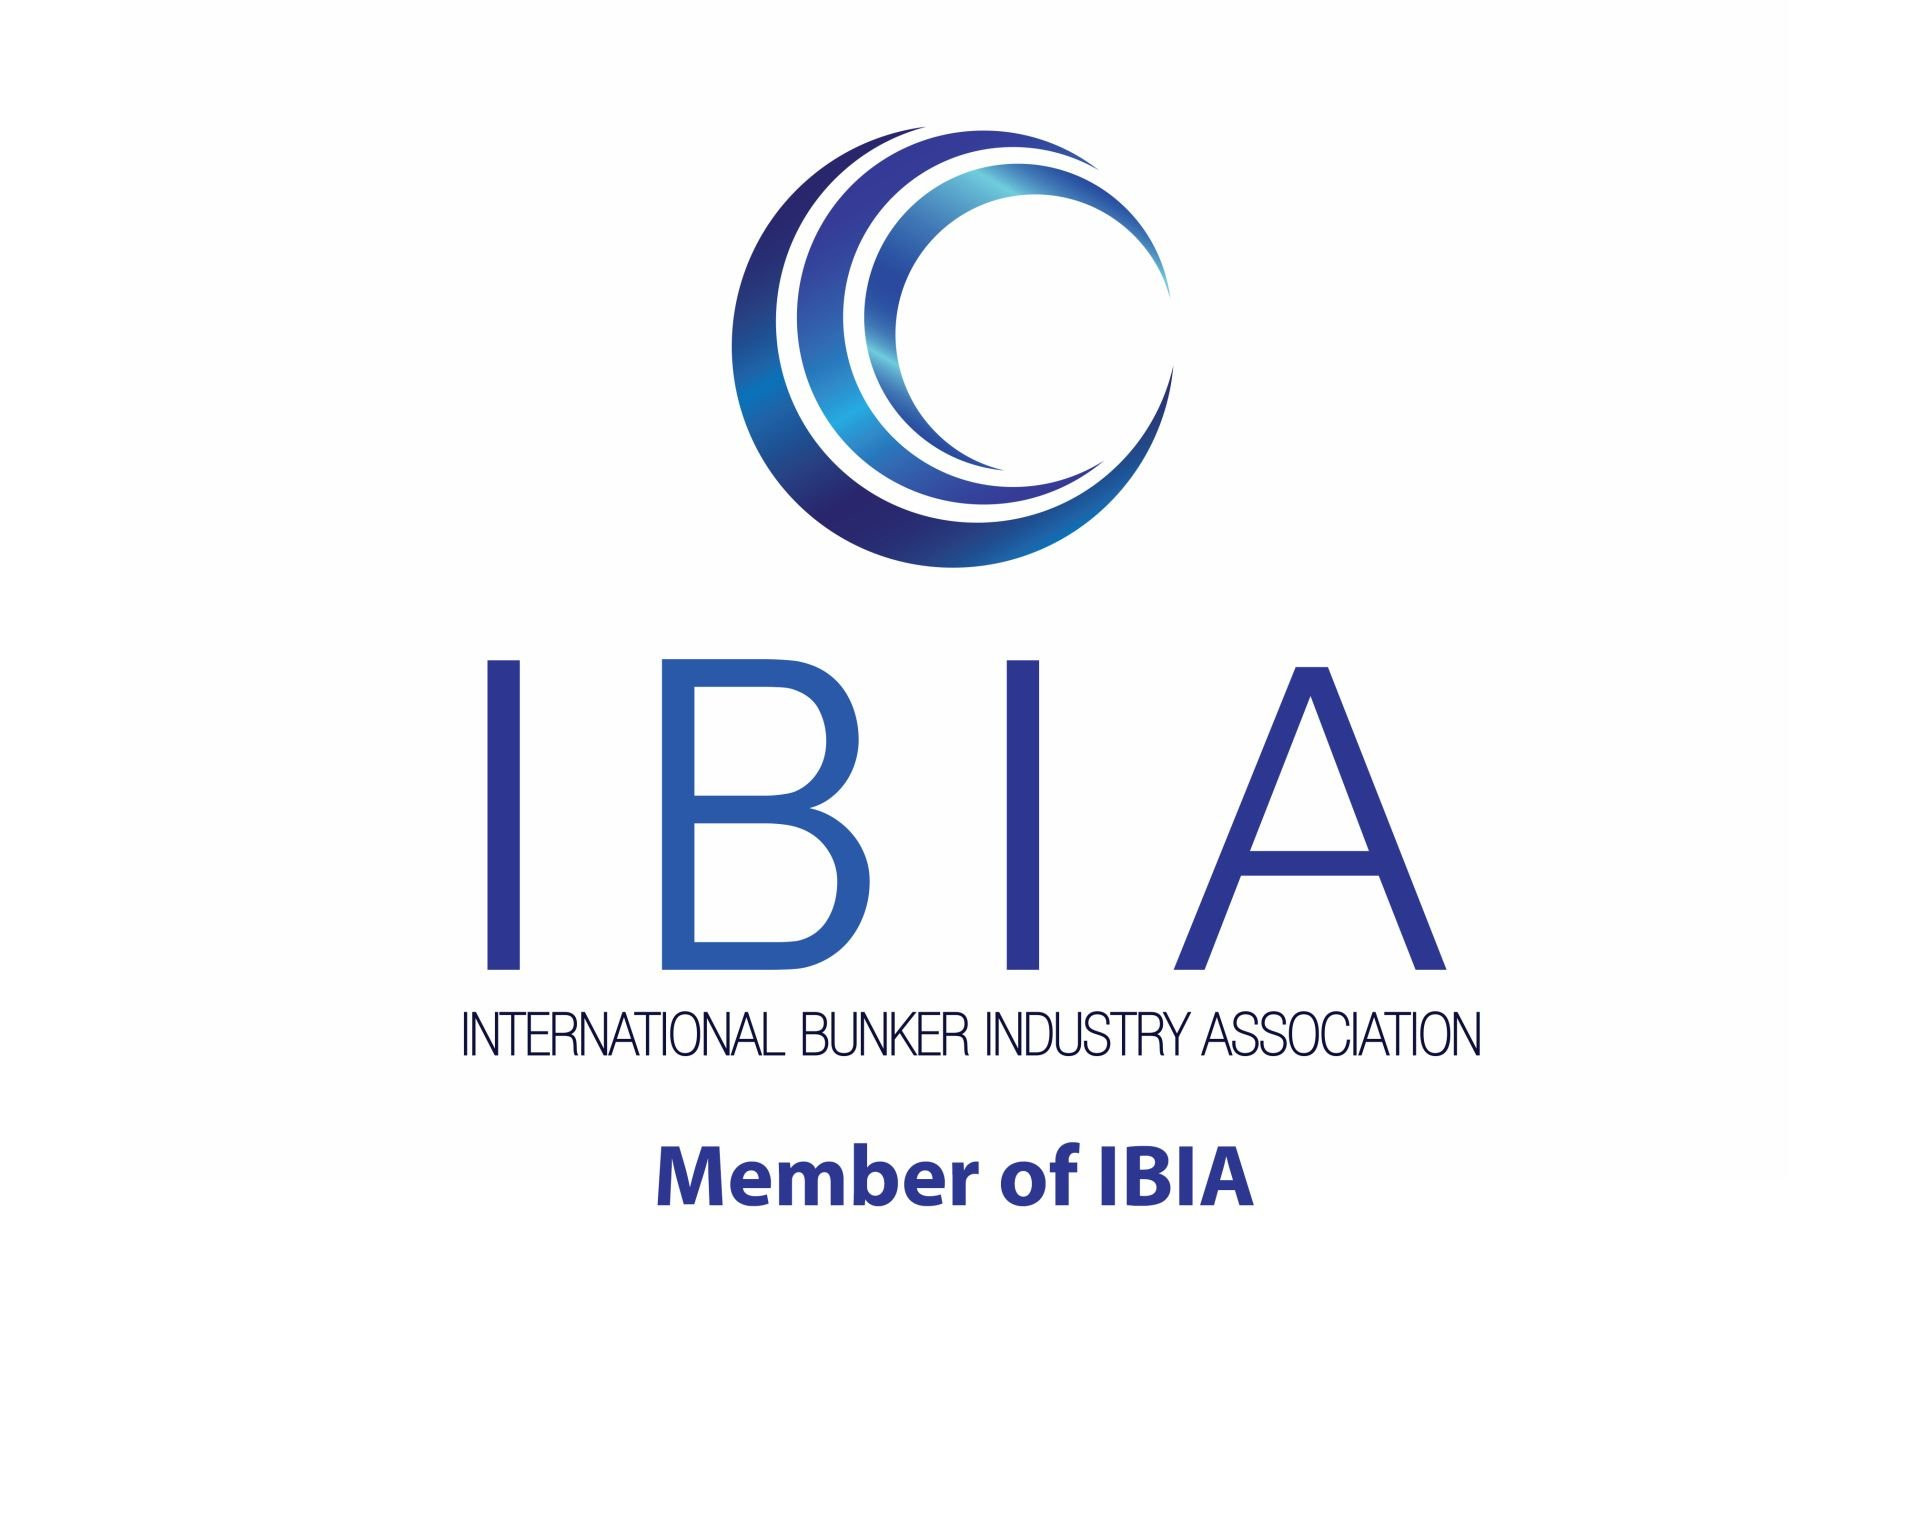 Sea Guardian Marine becomes a member of The International Bunker Industry Association (IBIA)